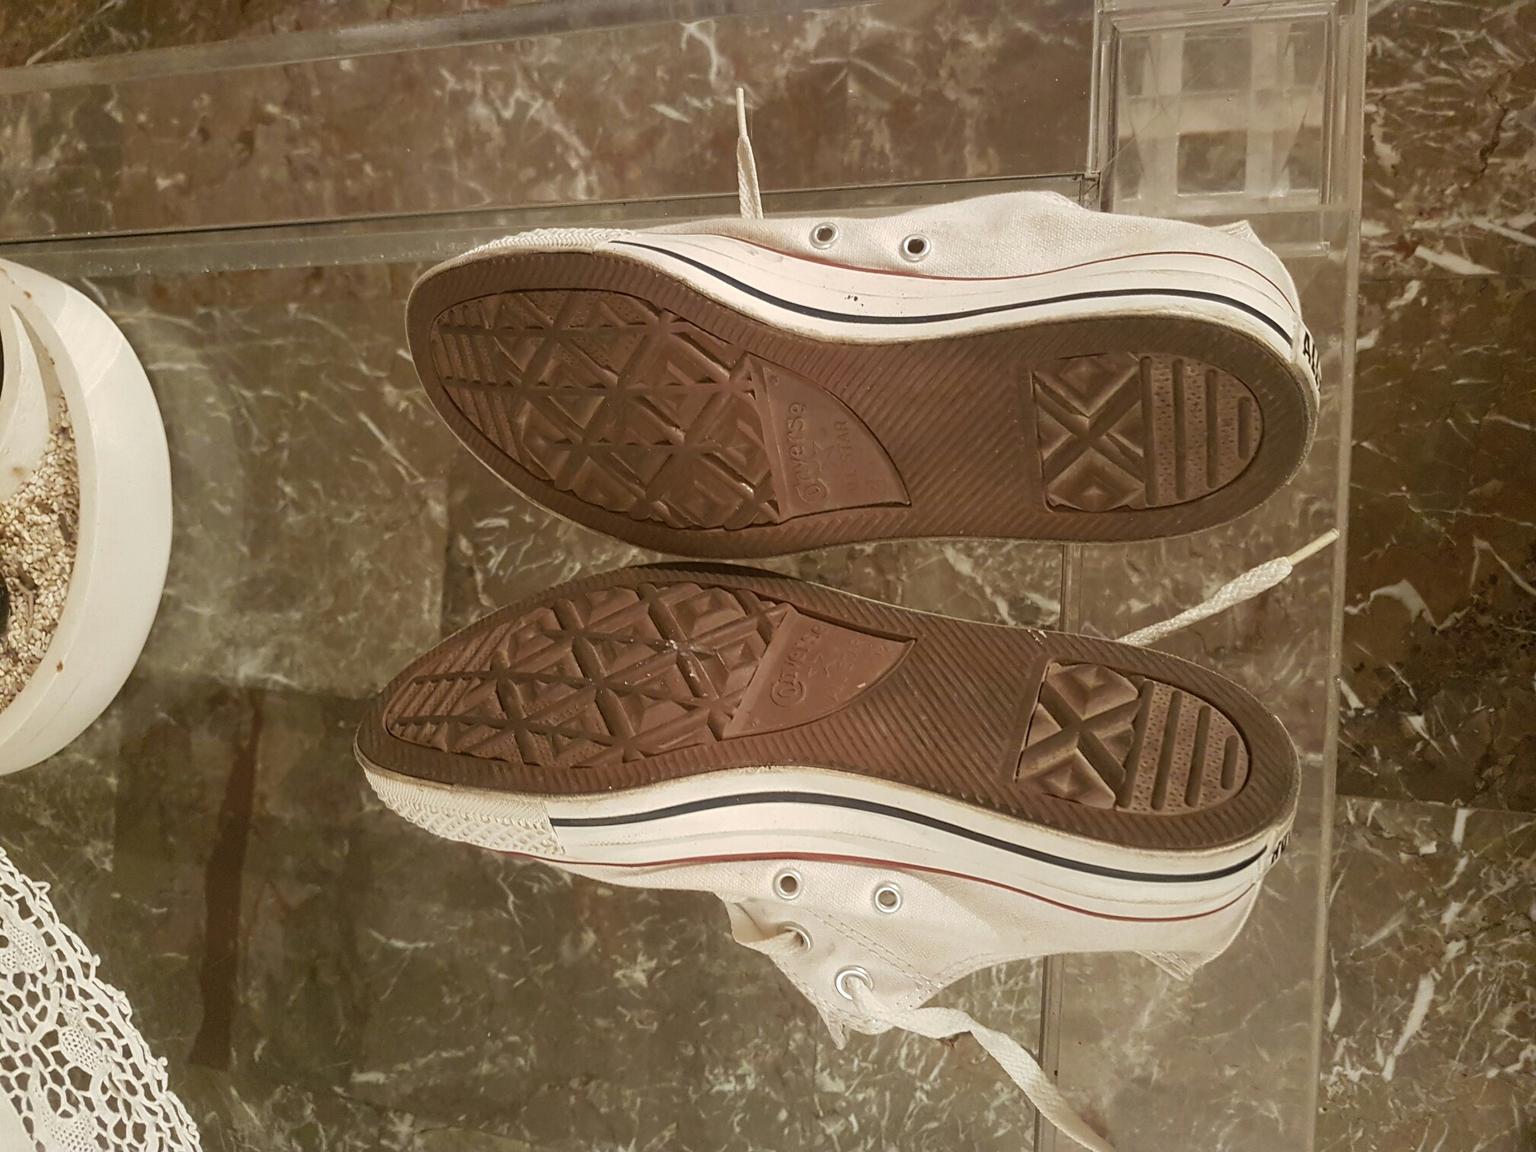 All star converse bianche basse 41 in 00191 Roma for €35.00 for sale |  Shpock